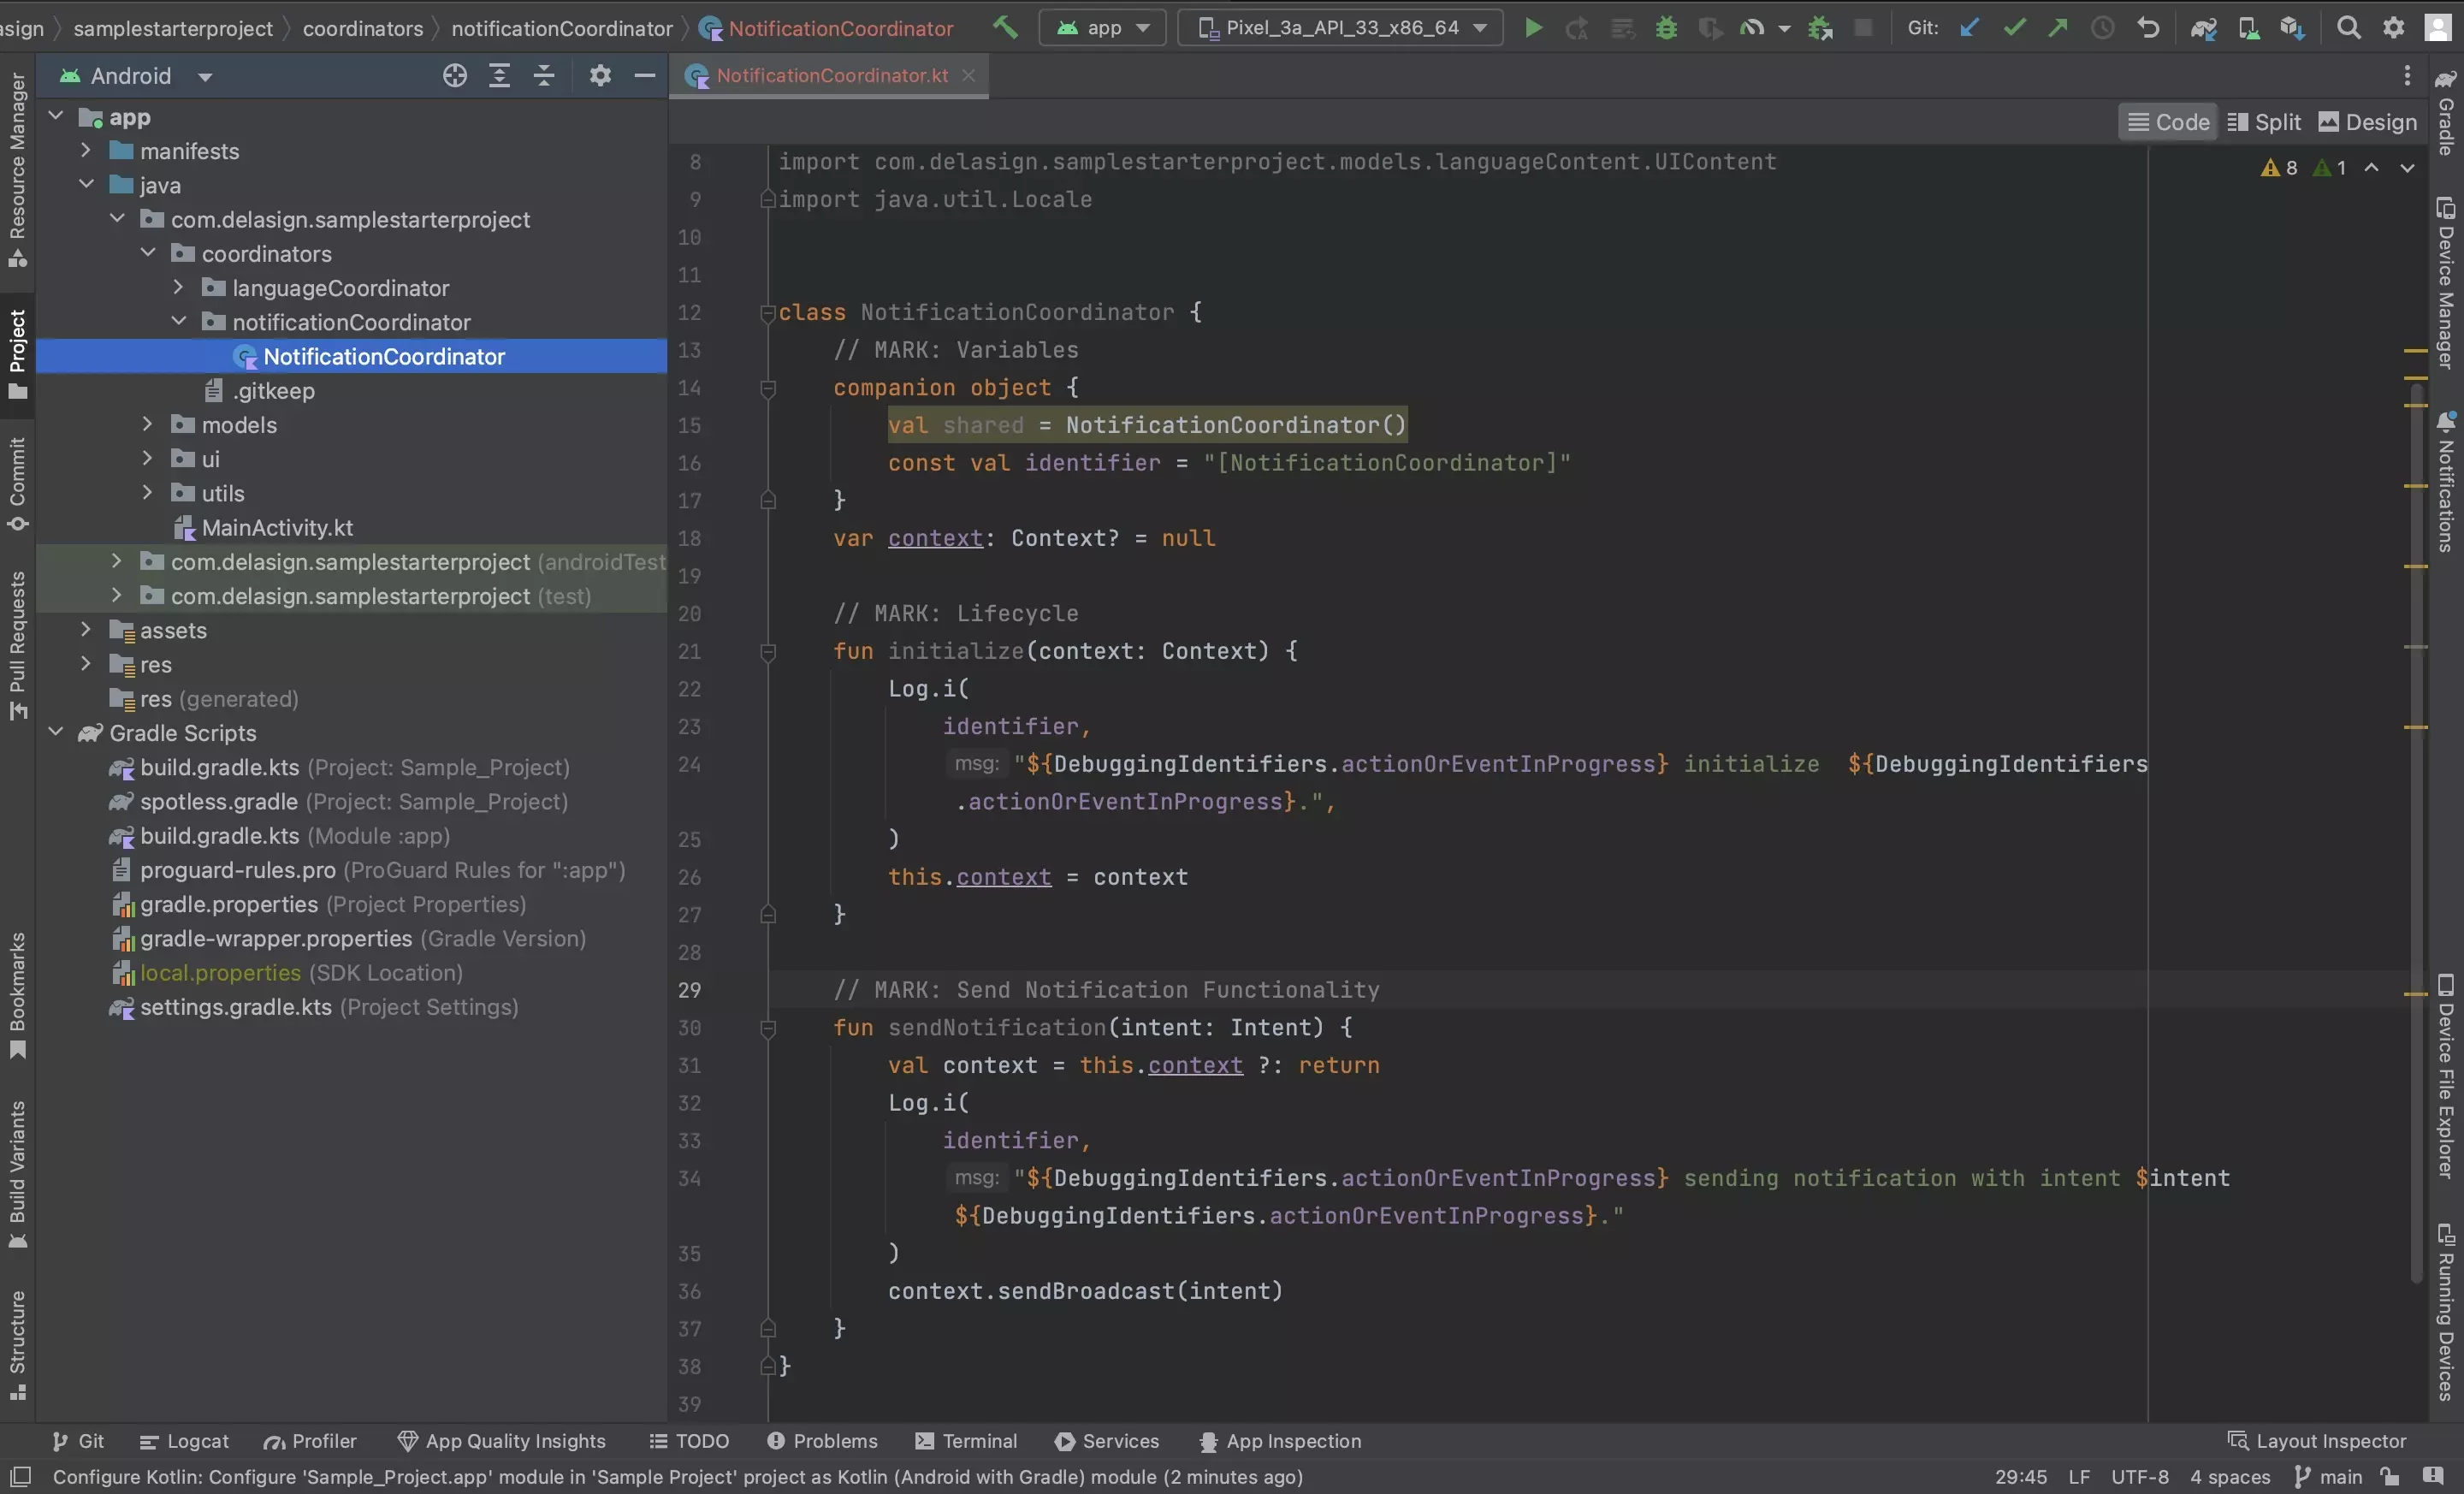 A screenshot of Android Studio showing the NotificationCoordinator.kt file. Code available below.